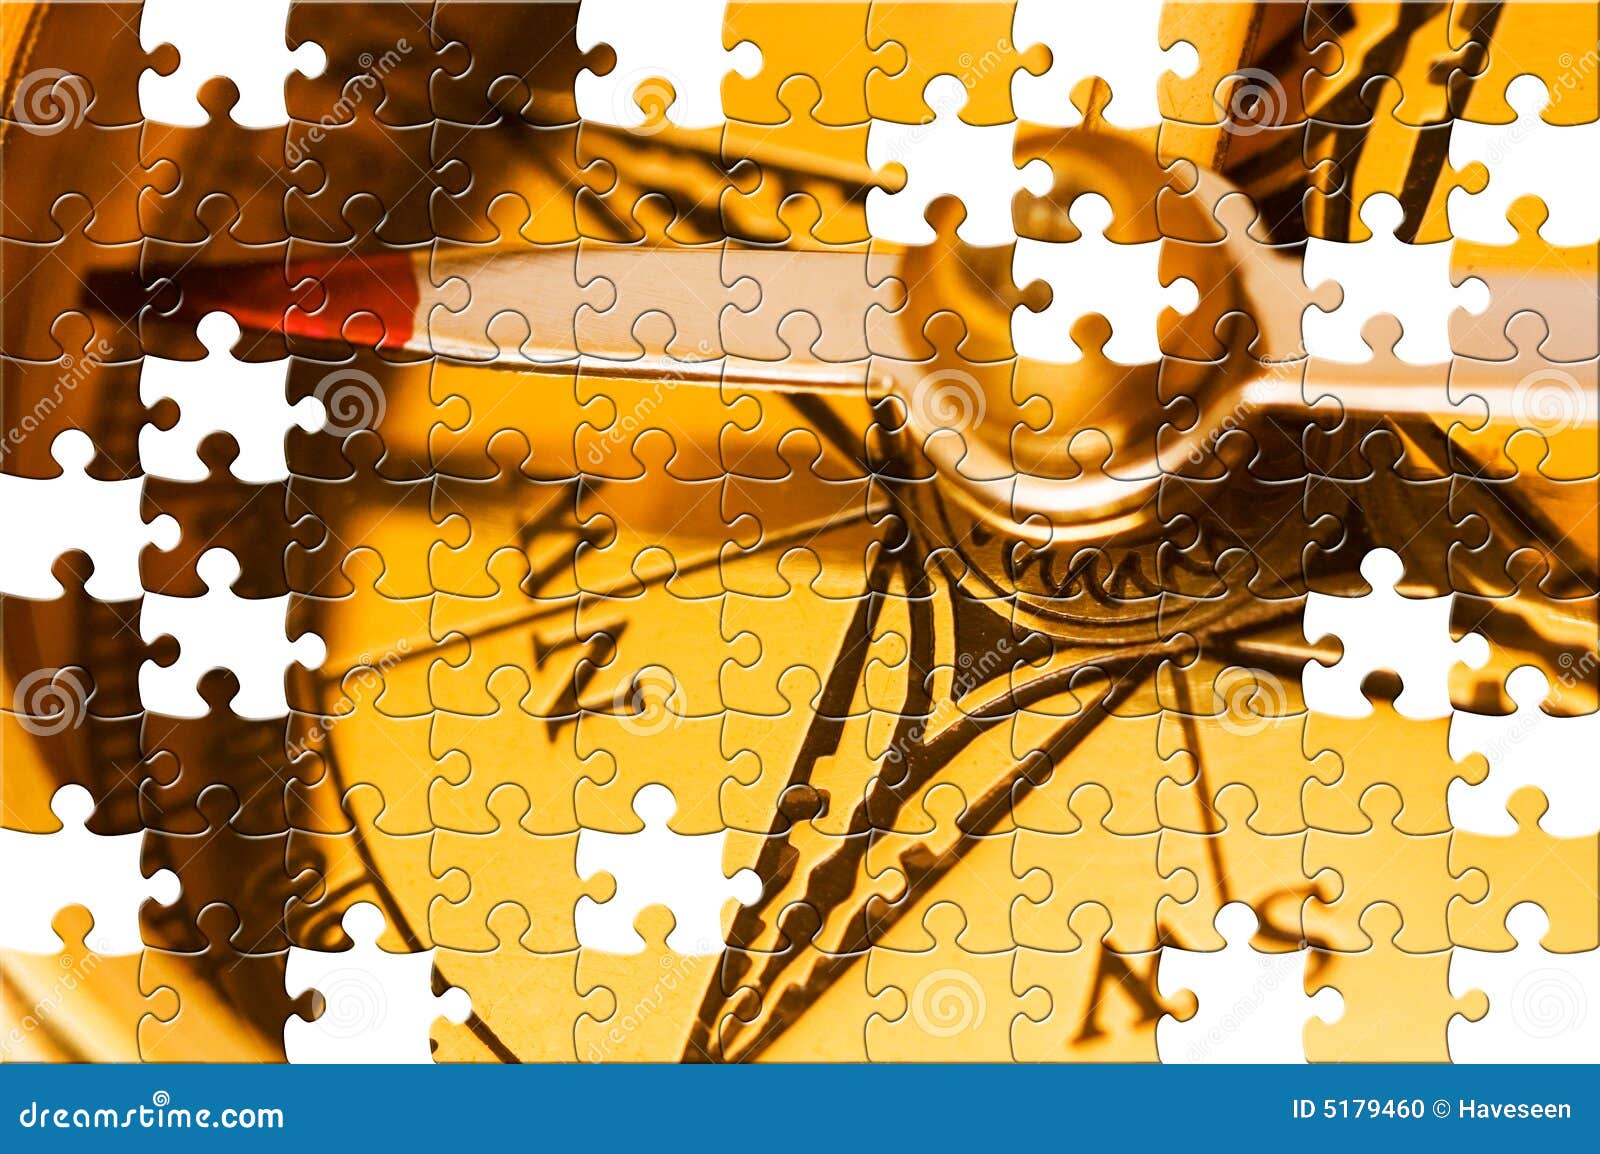 Puzzle With Missing Pieces Stock Photo - Image: 5179460